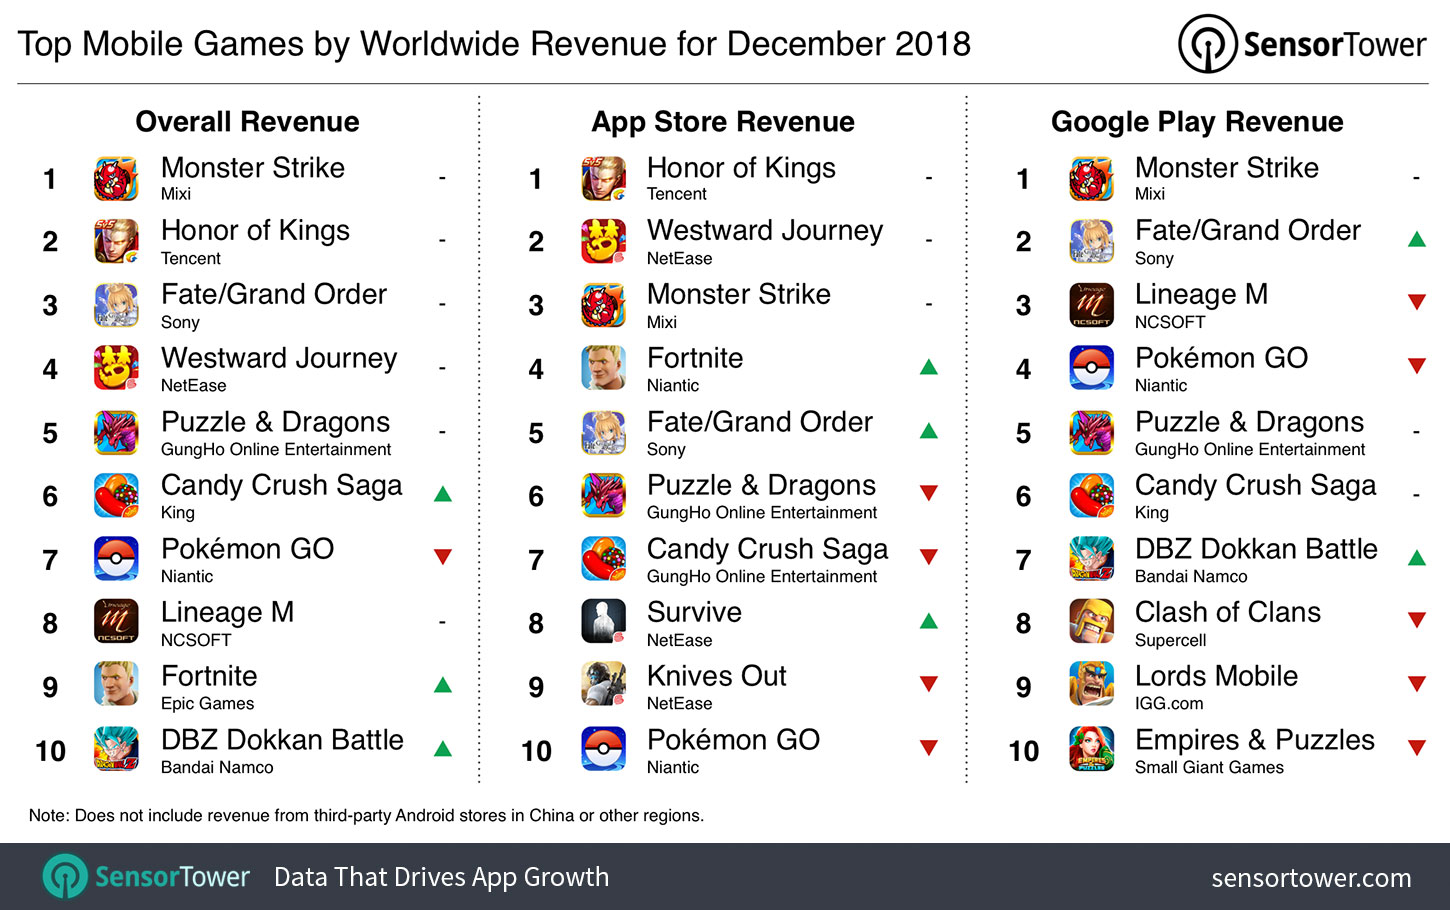 Top Mobile Games by Revenue for December 2018